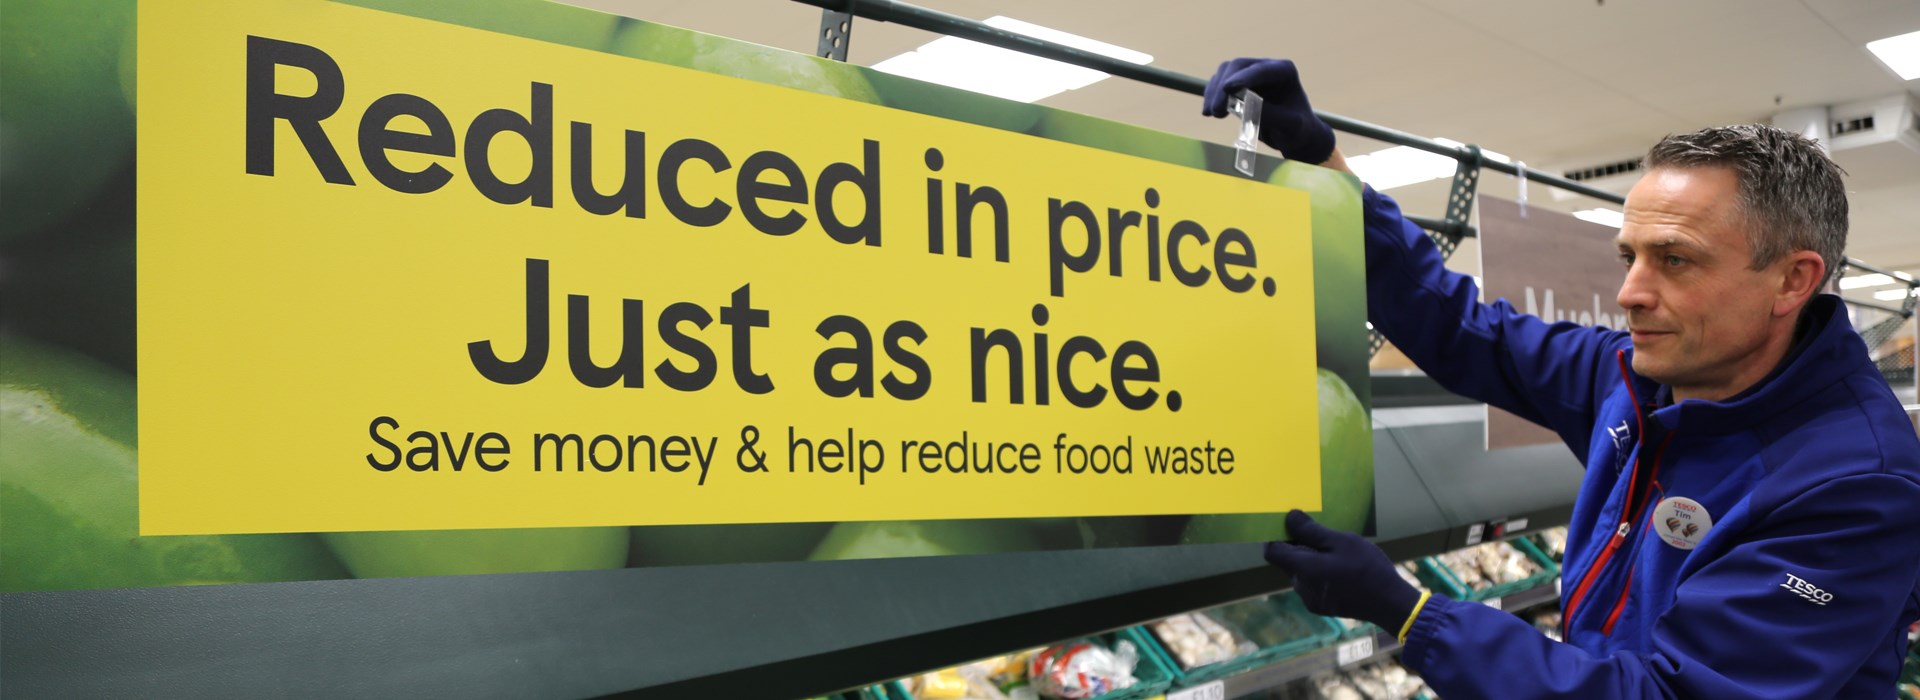 Two in three shoppers look for ‘reduced to clear’ food: Tesco survey